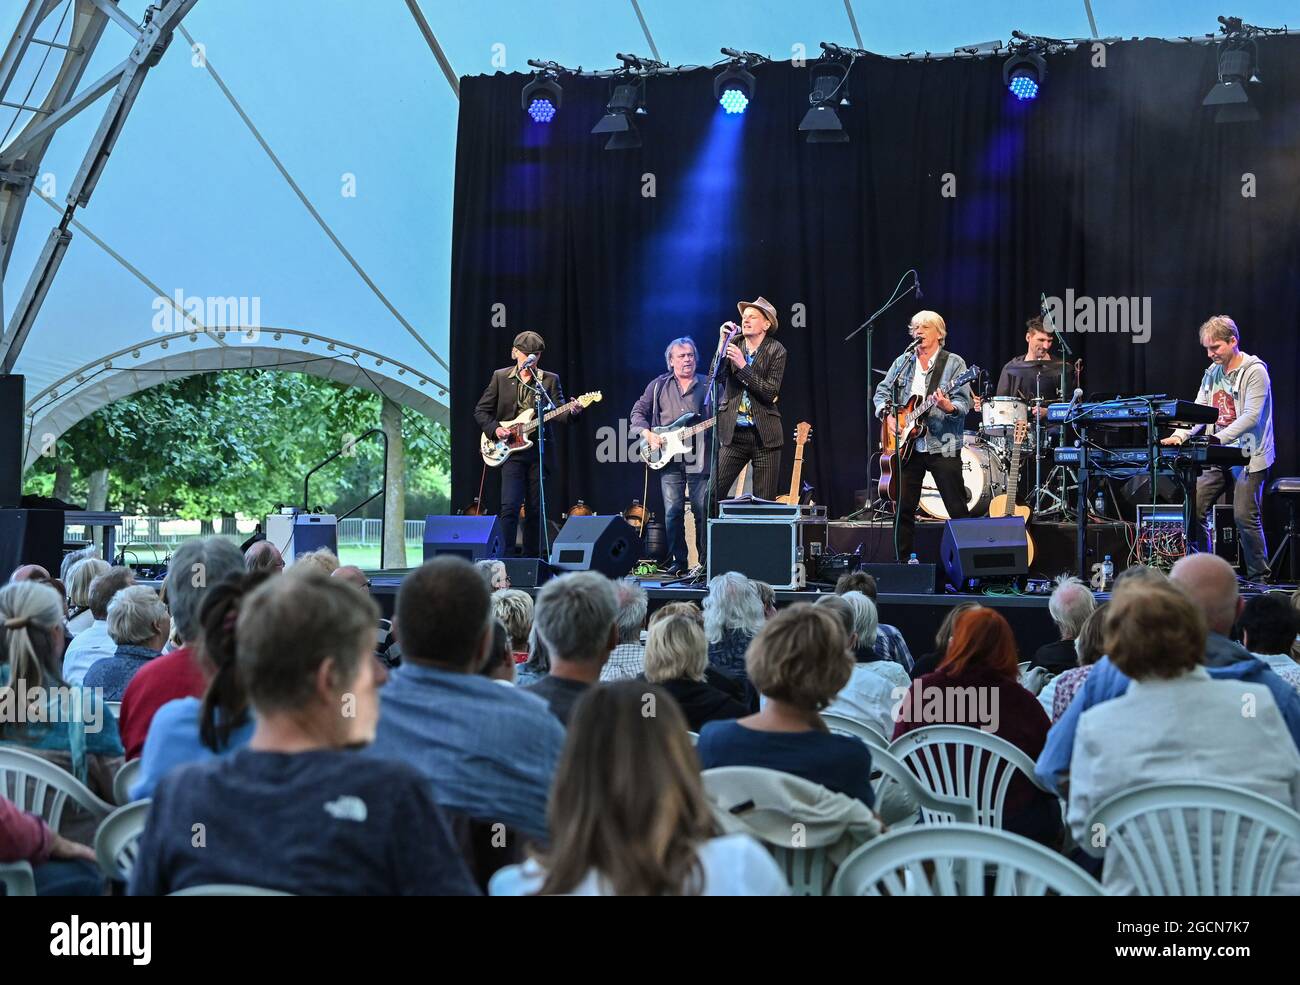 Neuhardenberg, Germany. 08th Aug, 2021. Alexander Scheer (3rd from left), actor, musician, singer and Andreas Dresen (3rd from right), director, musician, singer play Gundermann songs on a stage in the park of Neuhardenberg Castle to kick off the summer program. The programme of the open-air event series 'Into the open air!' runs until 05.09.2021. Many different concerts, readings and talks will take place under the large tent roof in the castle park. Credit: Patrick Pleul/dpa-Zentralbild/ZB/dpa/Alamy Live News Stock Photo